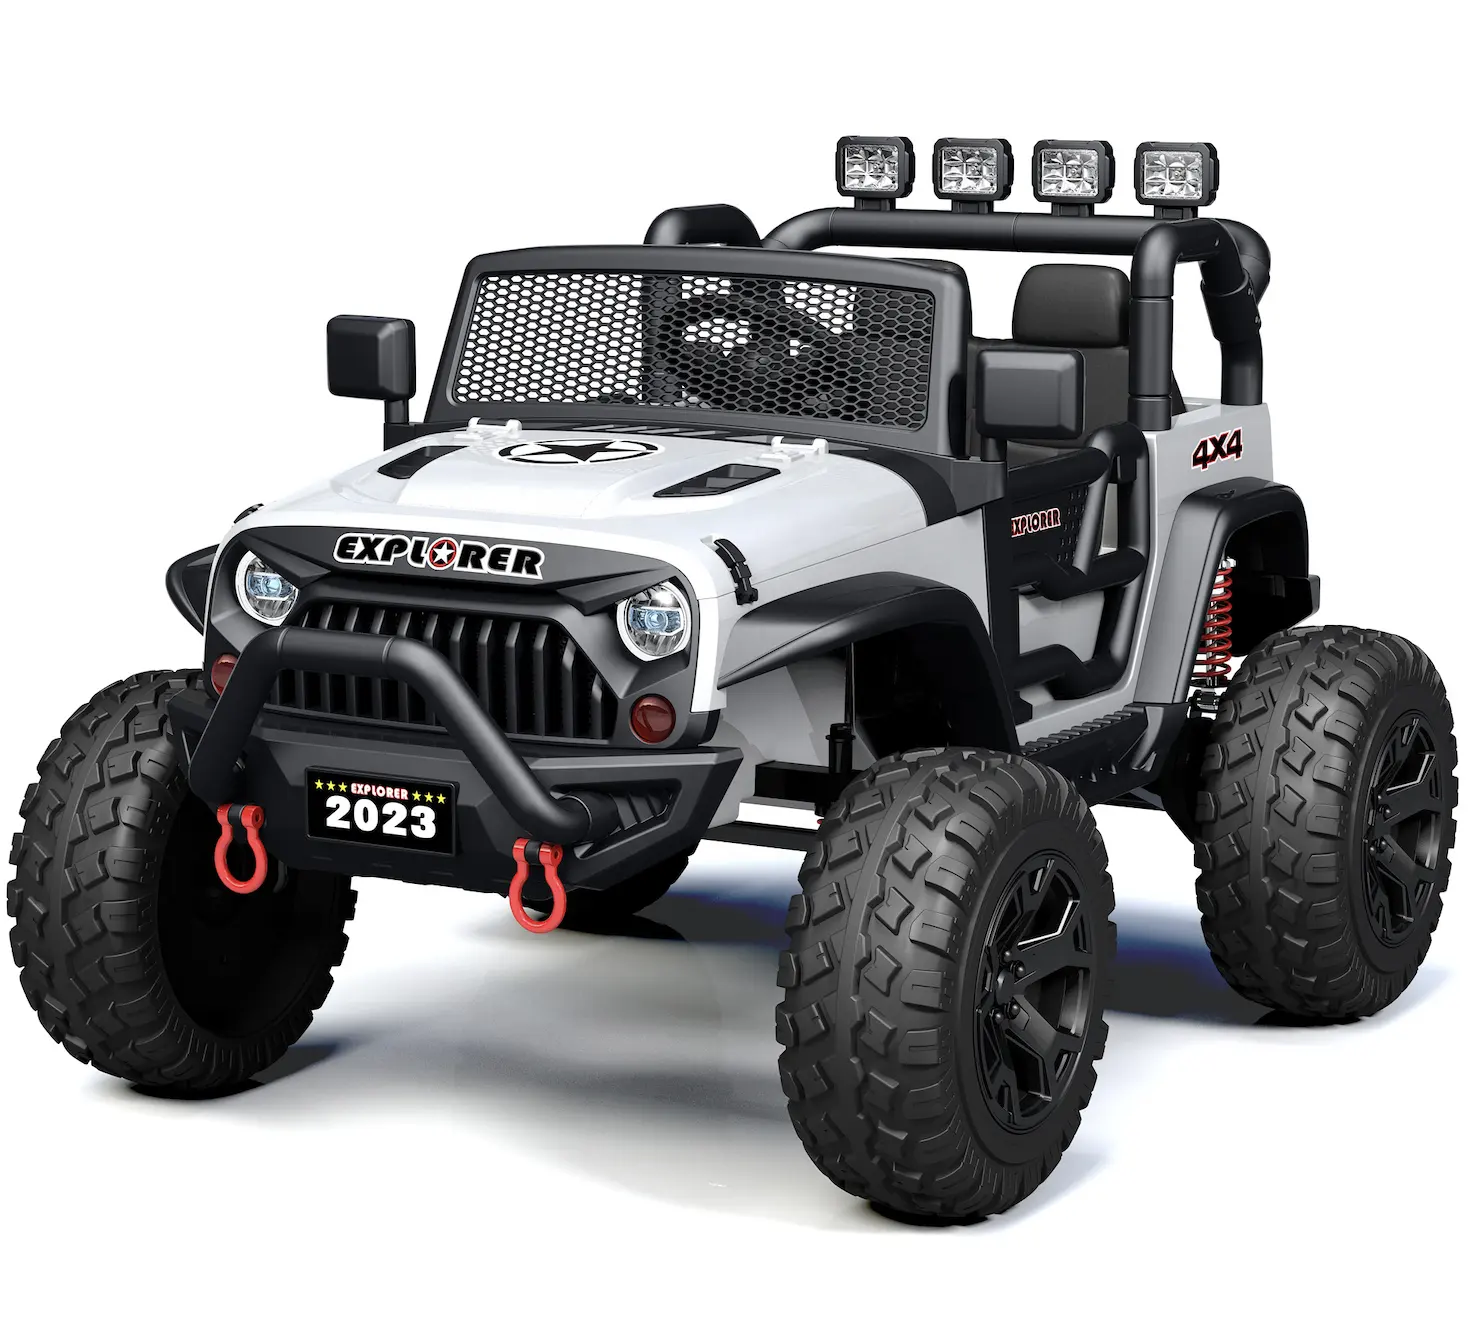 NEW Kids 24V Ride On Truck, Battery Powered Toy Car w/Spring Suspension, Remote Control